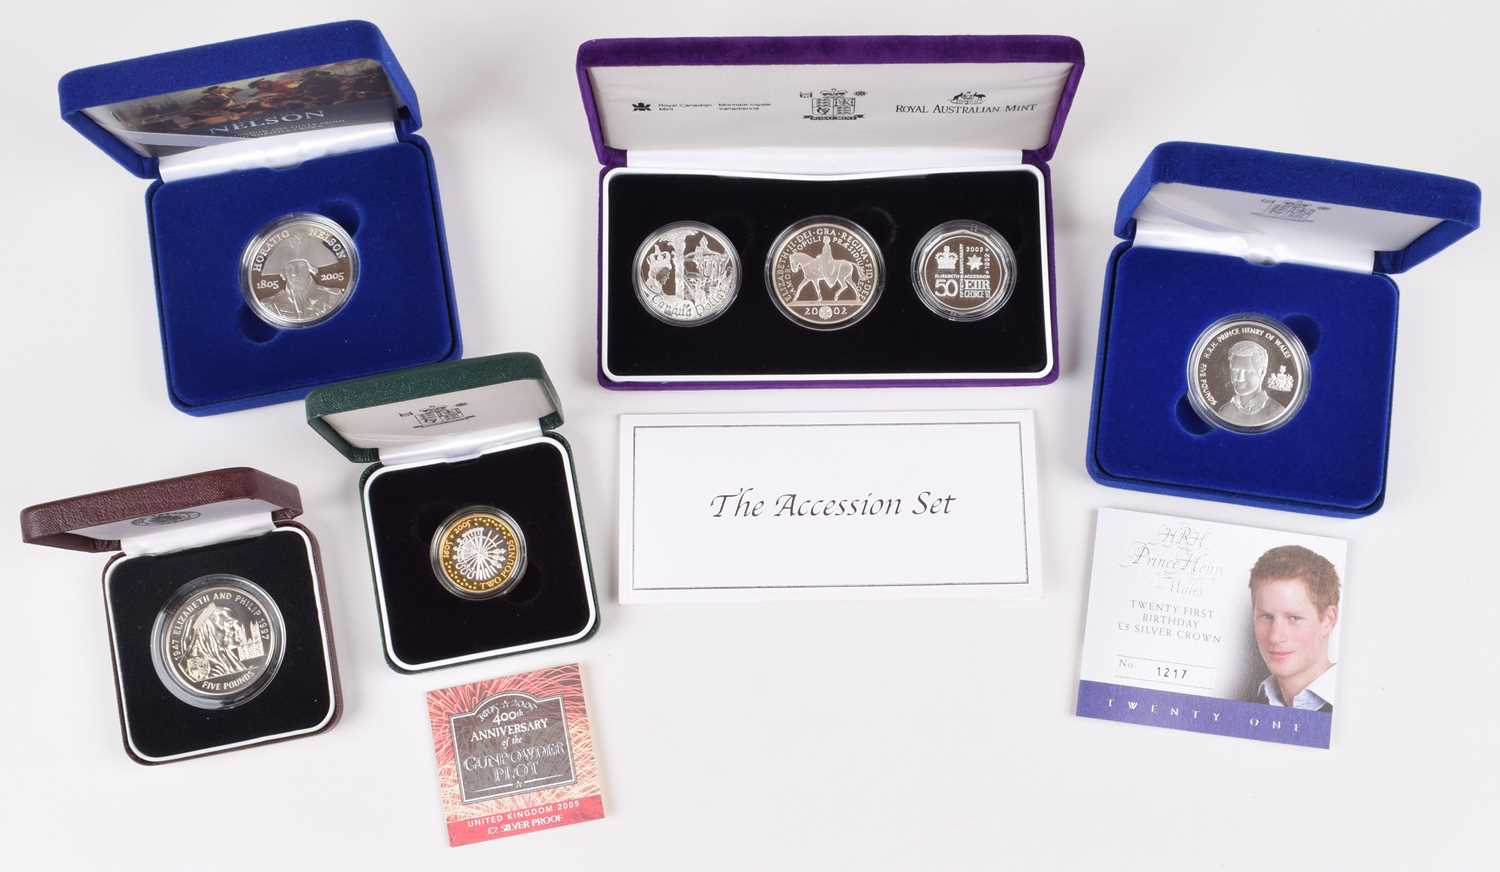 Lot 64 - Large assortment of various silver proof and other modern commemorative coins and currency.